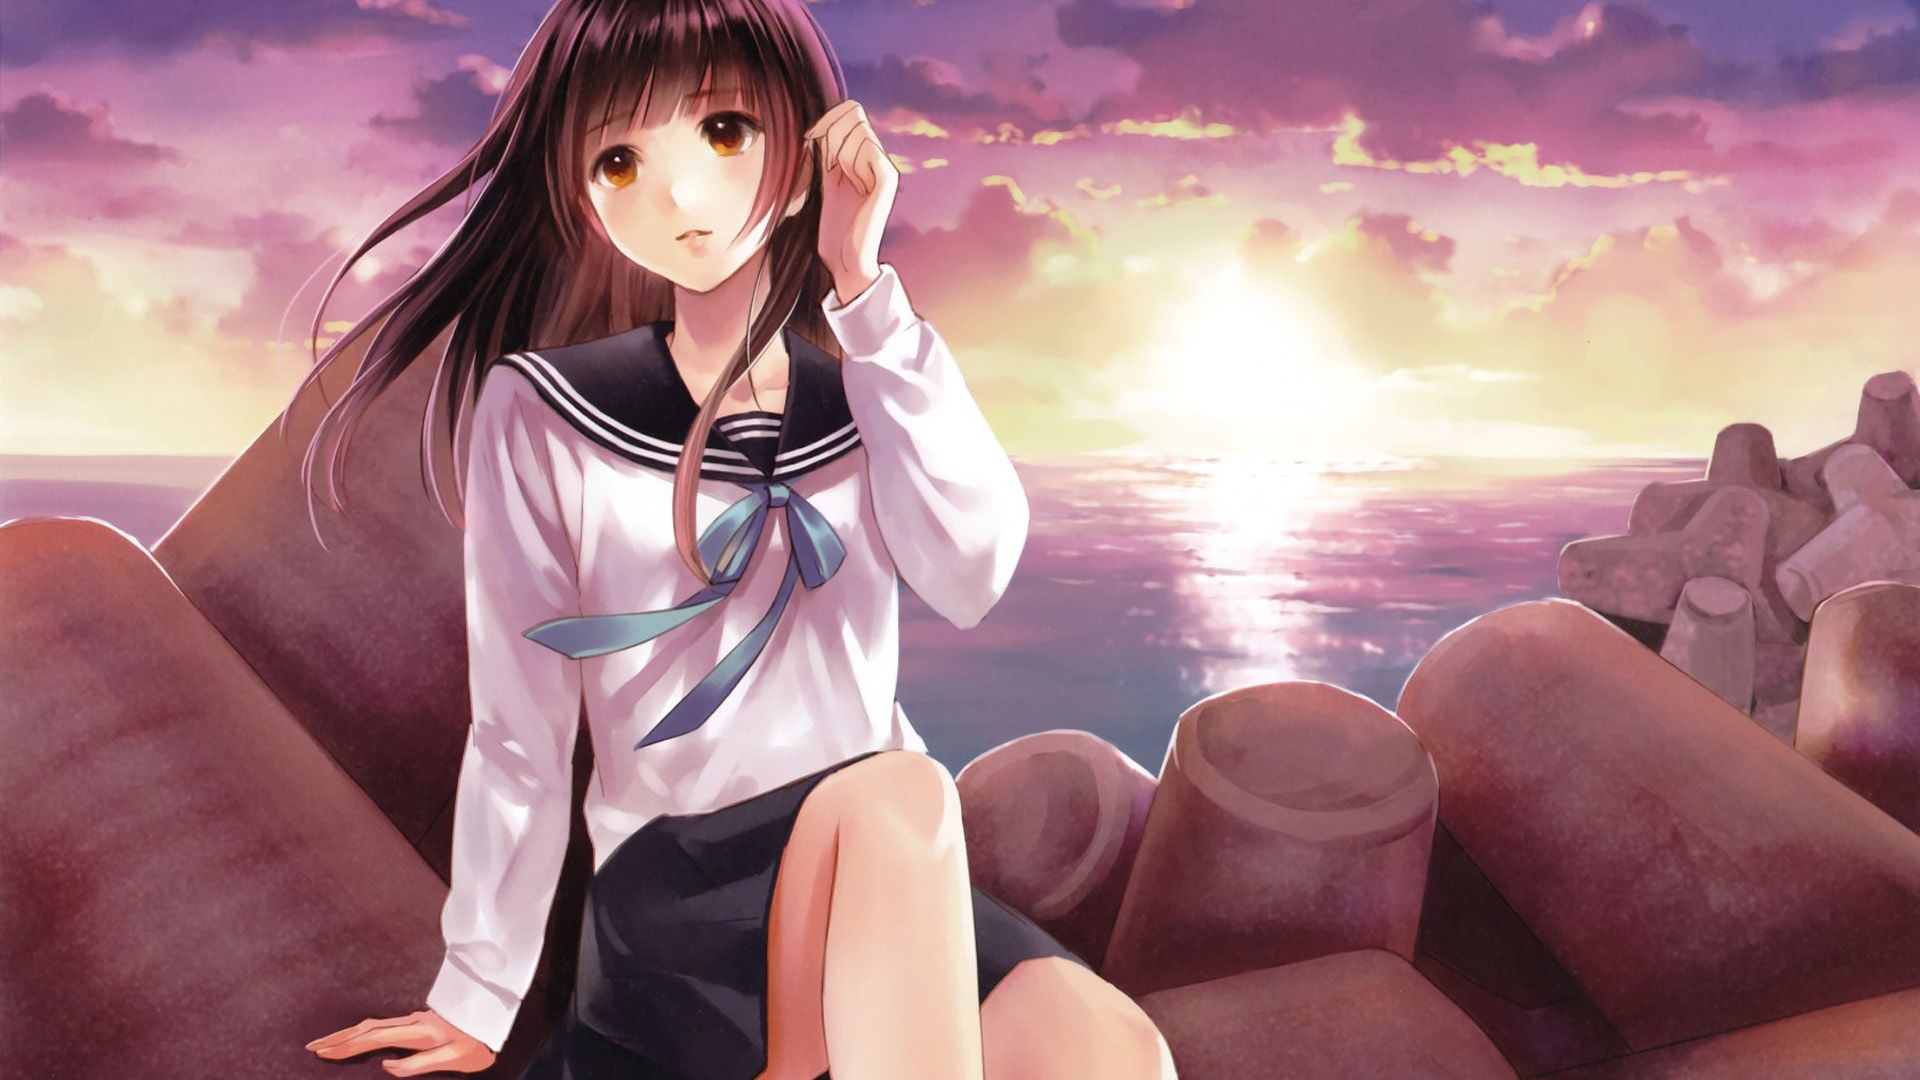 The sea, the wind, lovely girl, long hair, beautiful anime wallpaper